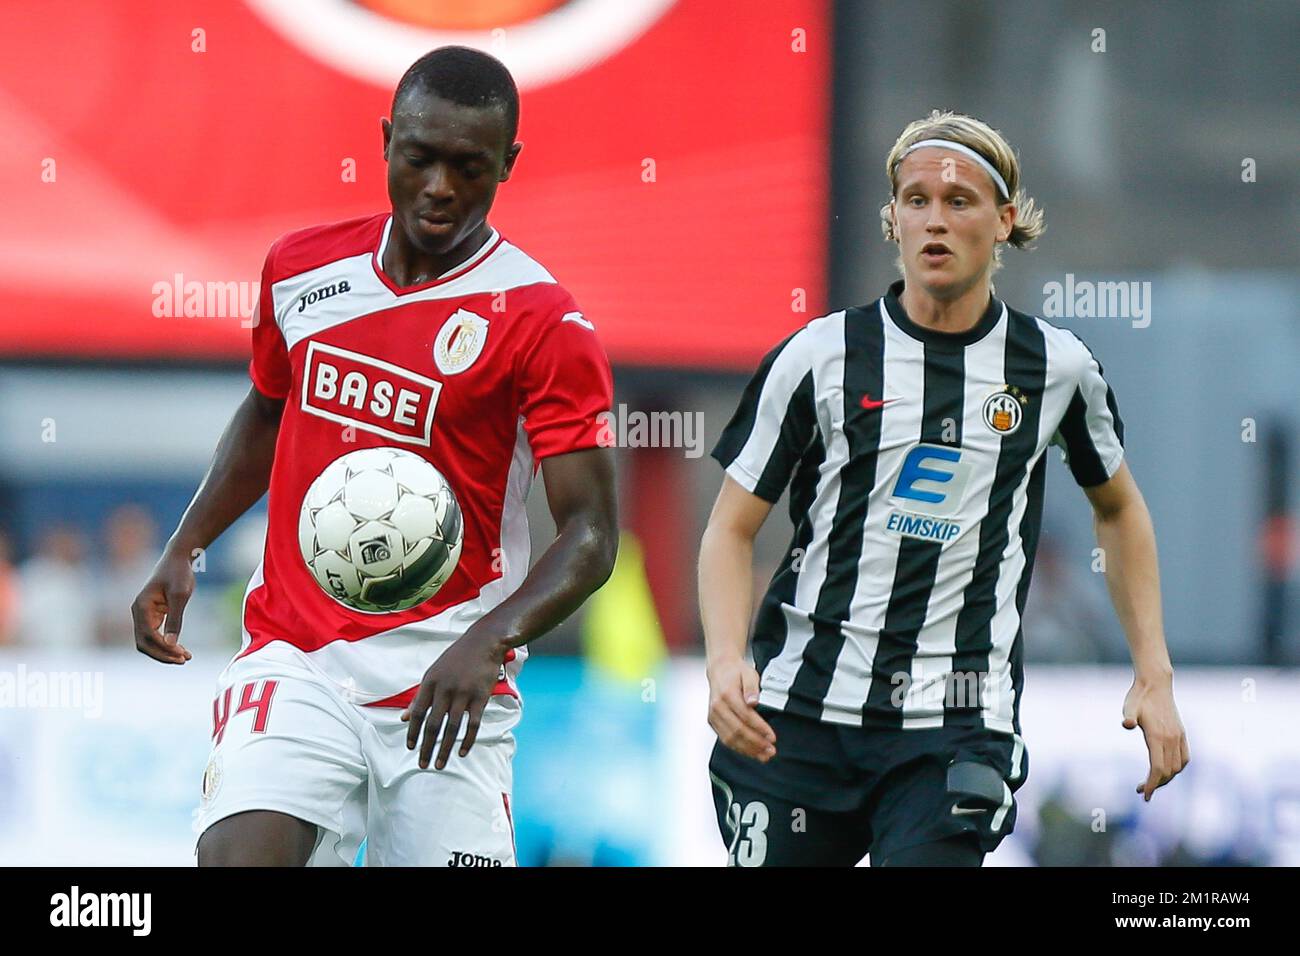 Standard's Ibrahima Cisse and KR Reykjavikís Alti Sigurjonsson fight for the ball during the return leg game of the second preliminary round of Europa League with Belgian first division soccer team Standard de Liege against Icelandic team KR Reykjavik, Thursday 25 July 2013, in Liege. Standard won the first leg with a 1-3 score.  Stock Photo